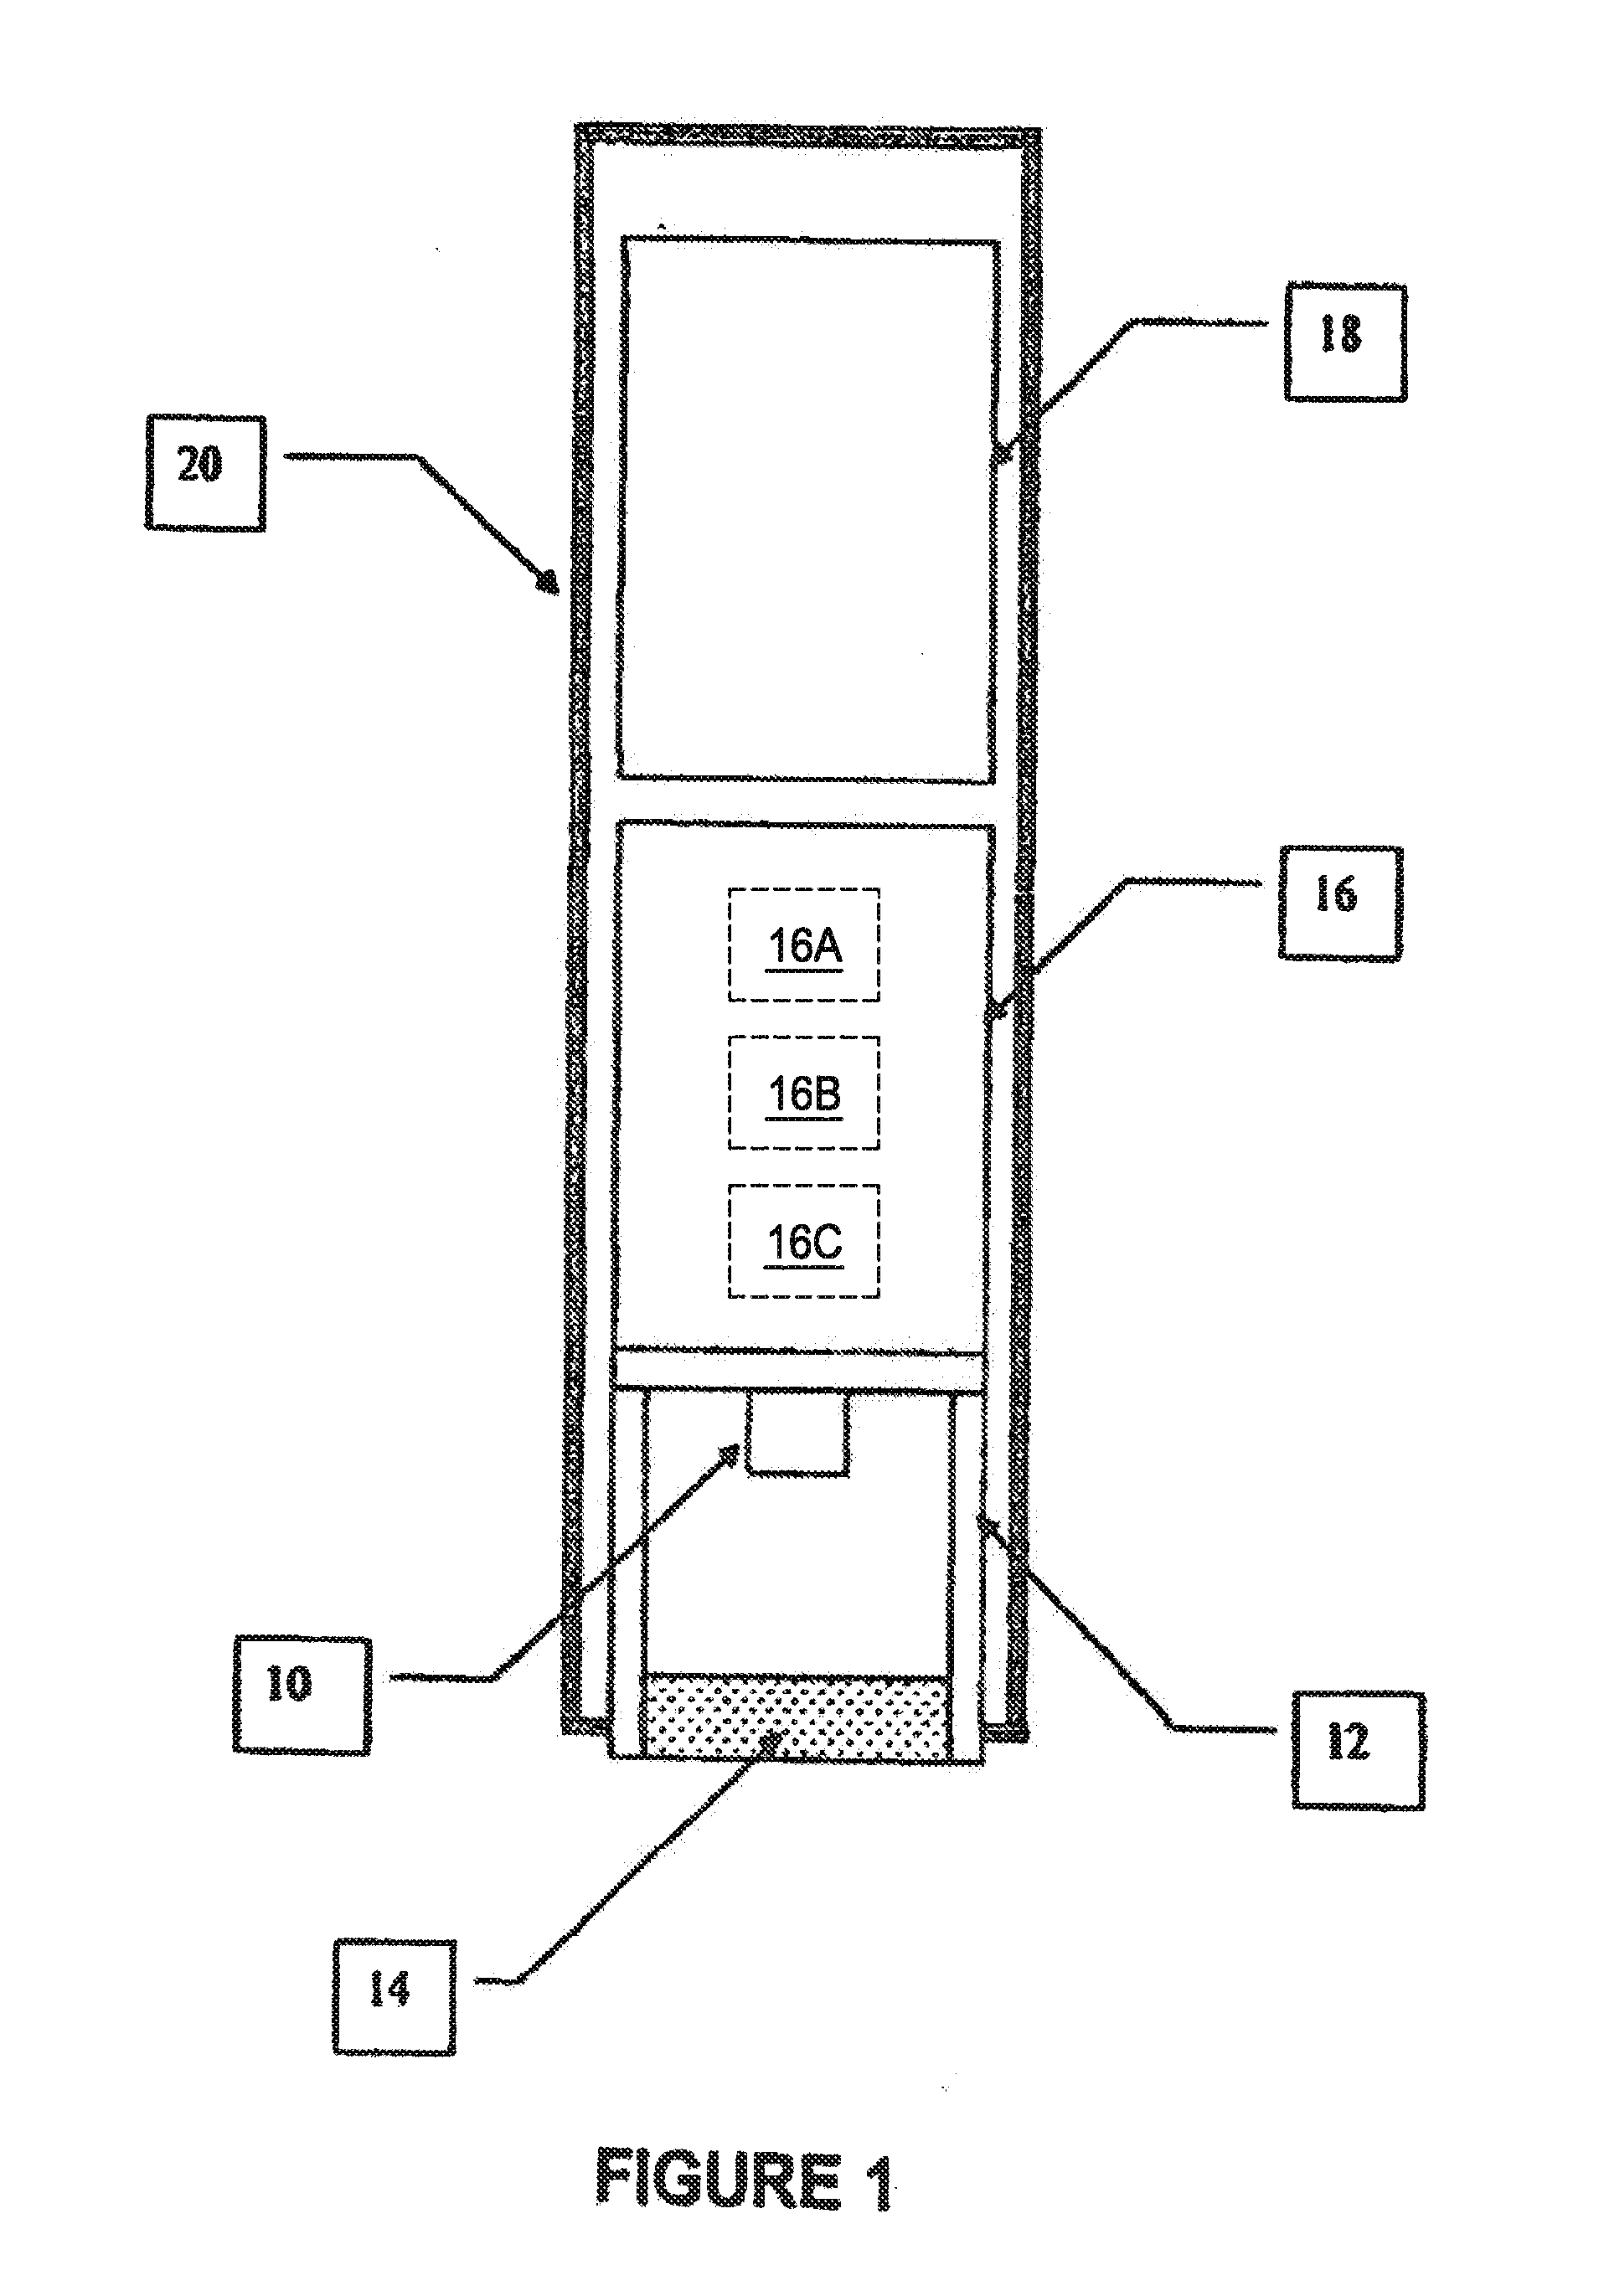 Self-contained, eye-safe hair-regrowth-inhibition apparatus and method